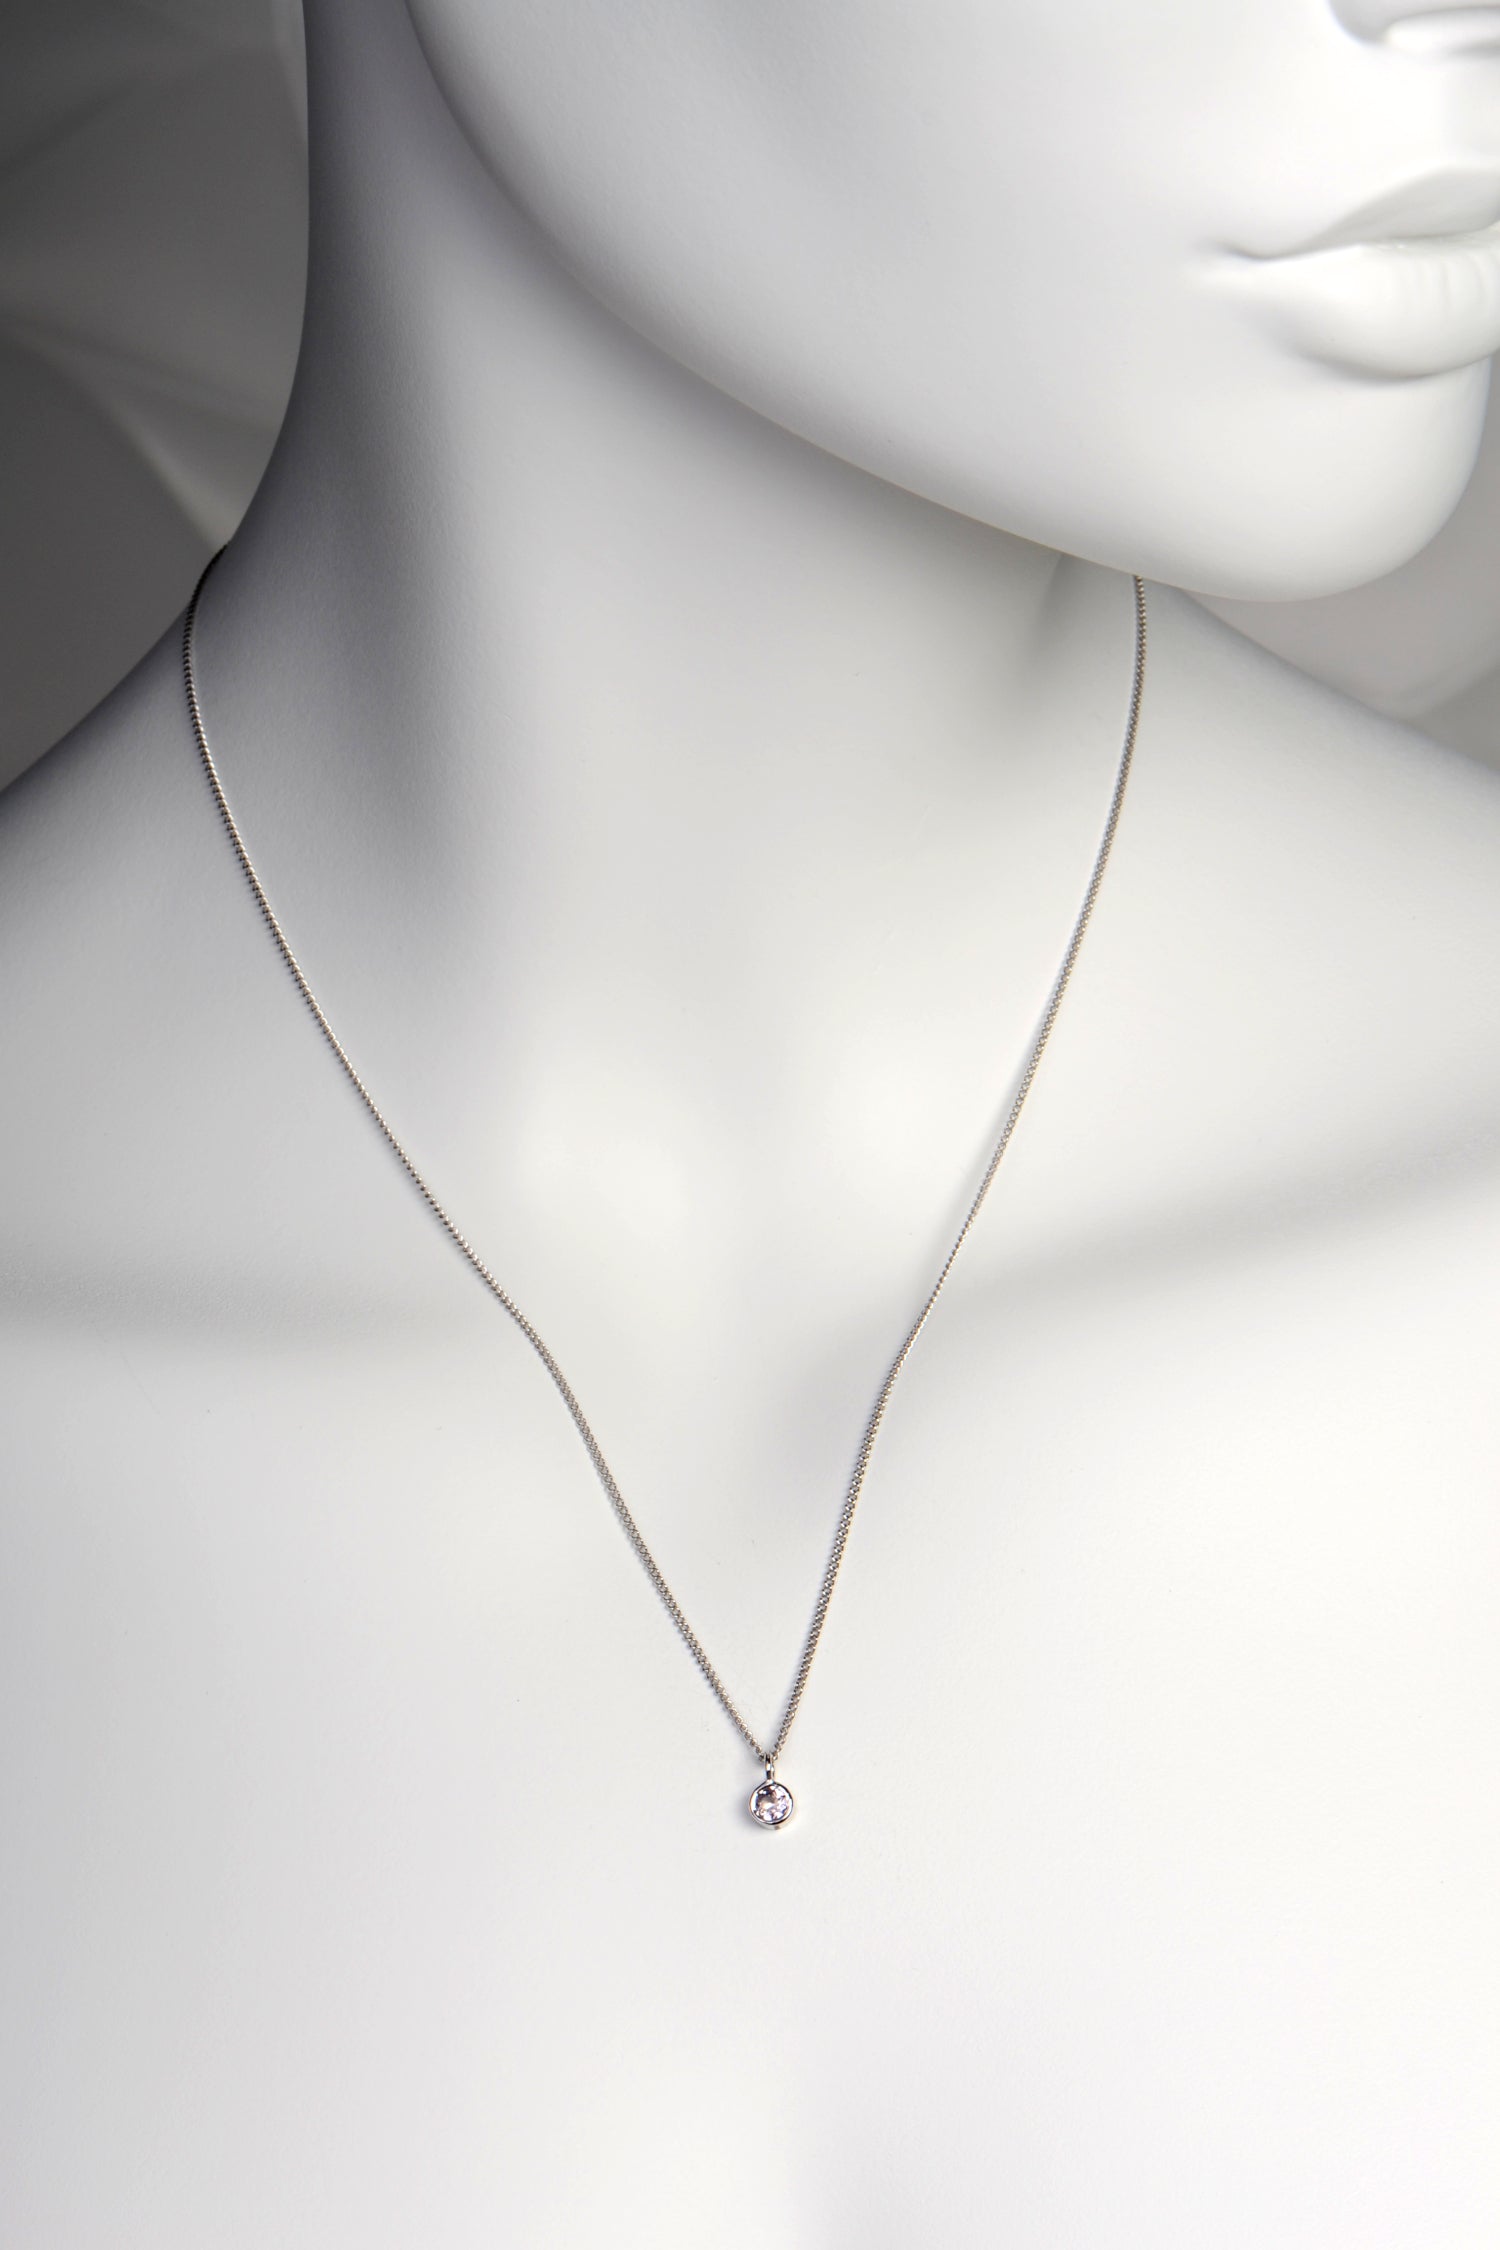 Handmade white gold morganite round pendant in 45cm hanging from a 45cm chain that sits about an inch below the collar bone